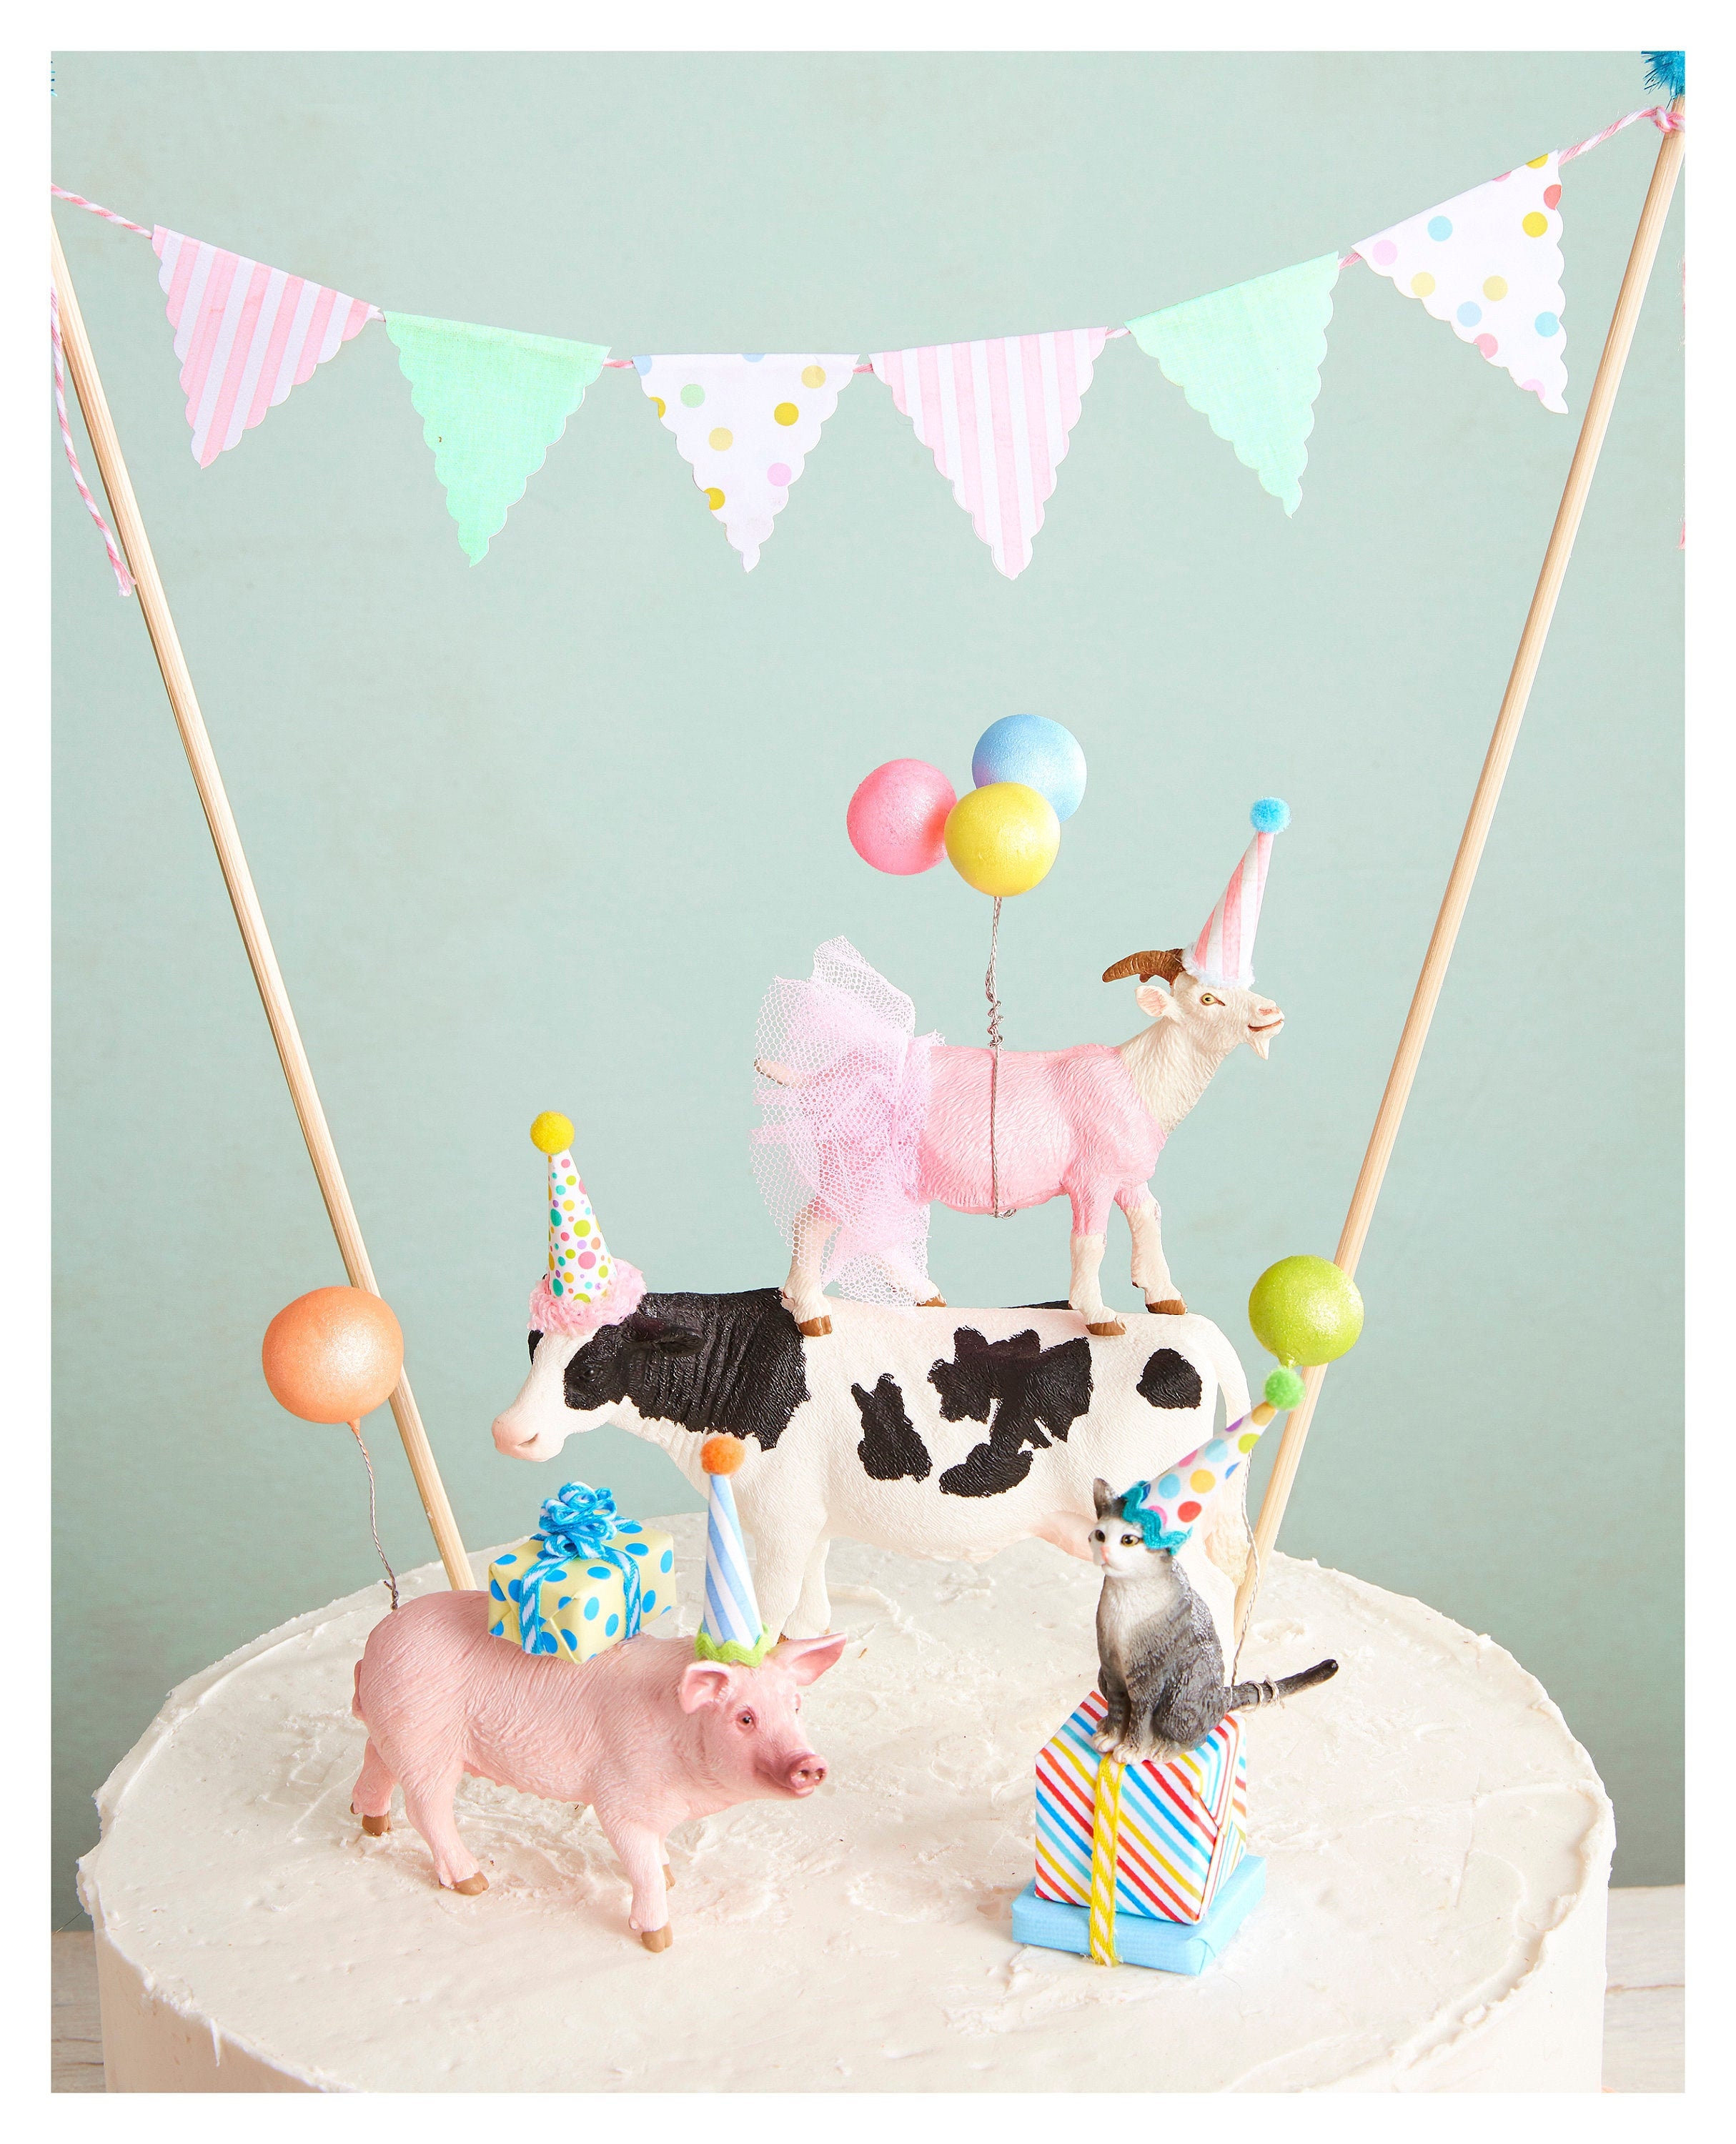  Farm Animal Cake Topper with Cow Horse Sheep Pig Duck Hen for  Farm Animal Theme Birthday Baby Shower Party : Toys & Games